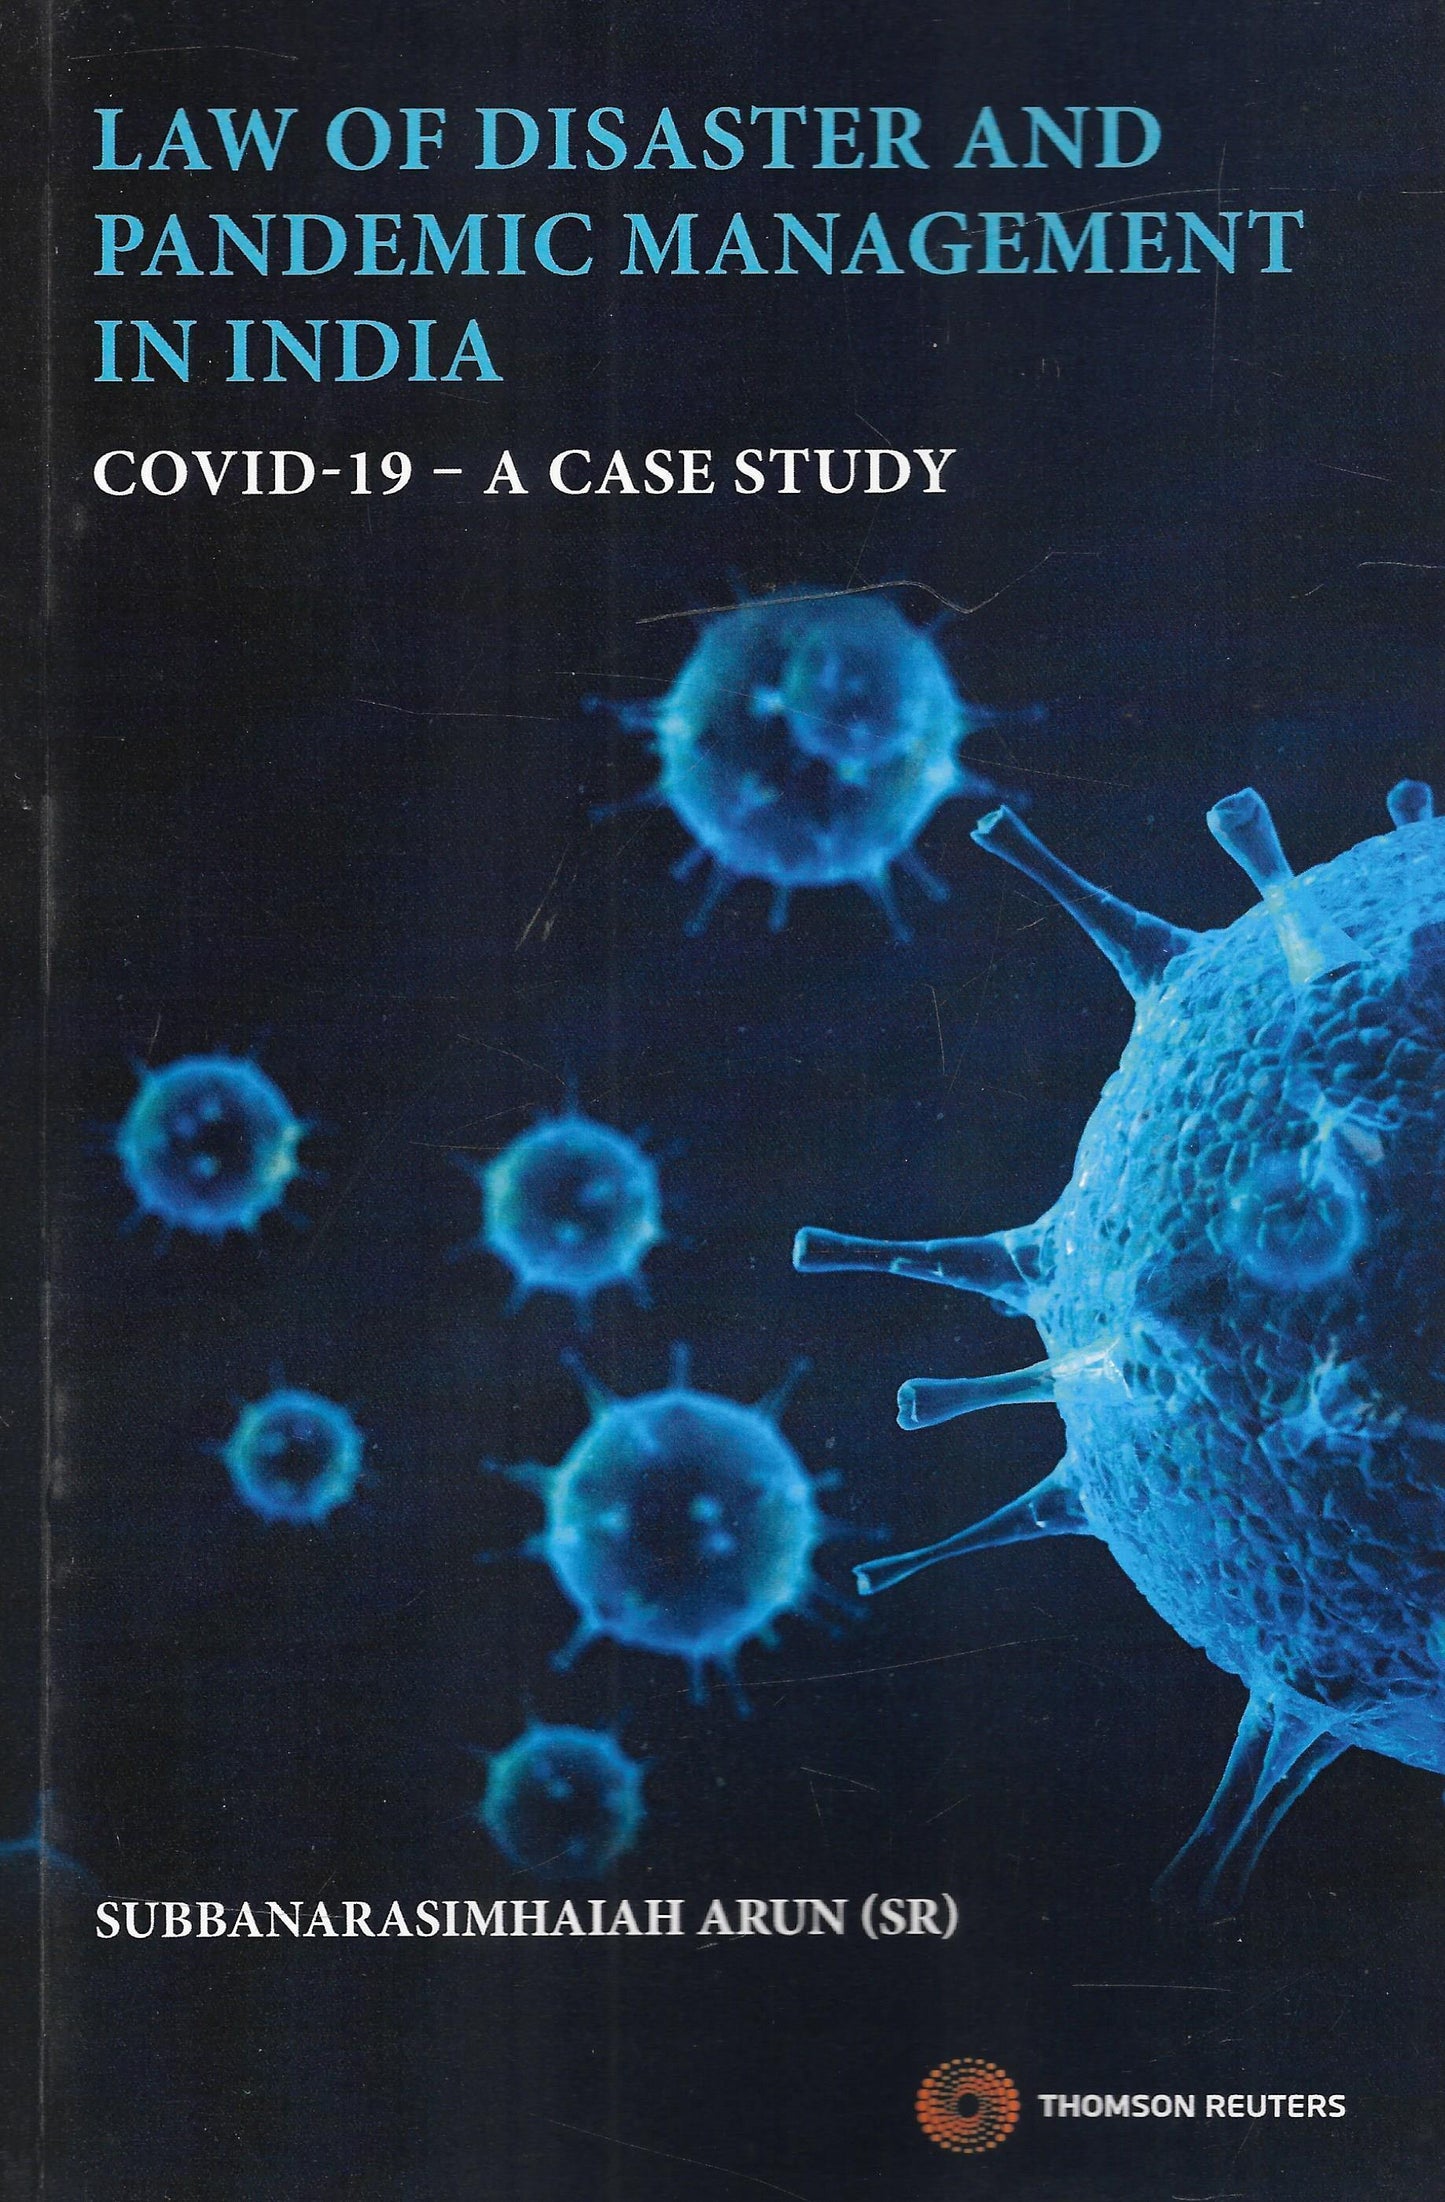 Law of Disaster and Pandemic Management in India COVID-19 A CASE STUDY